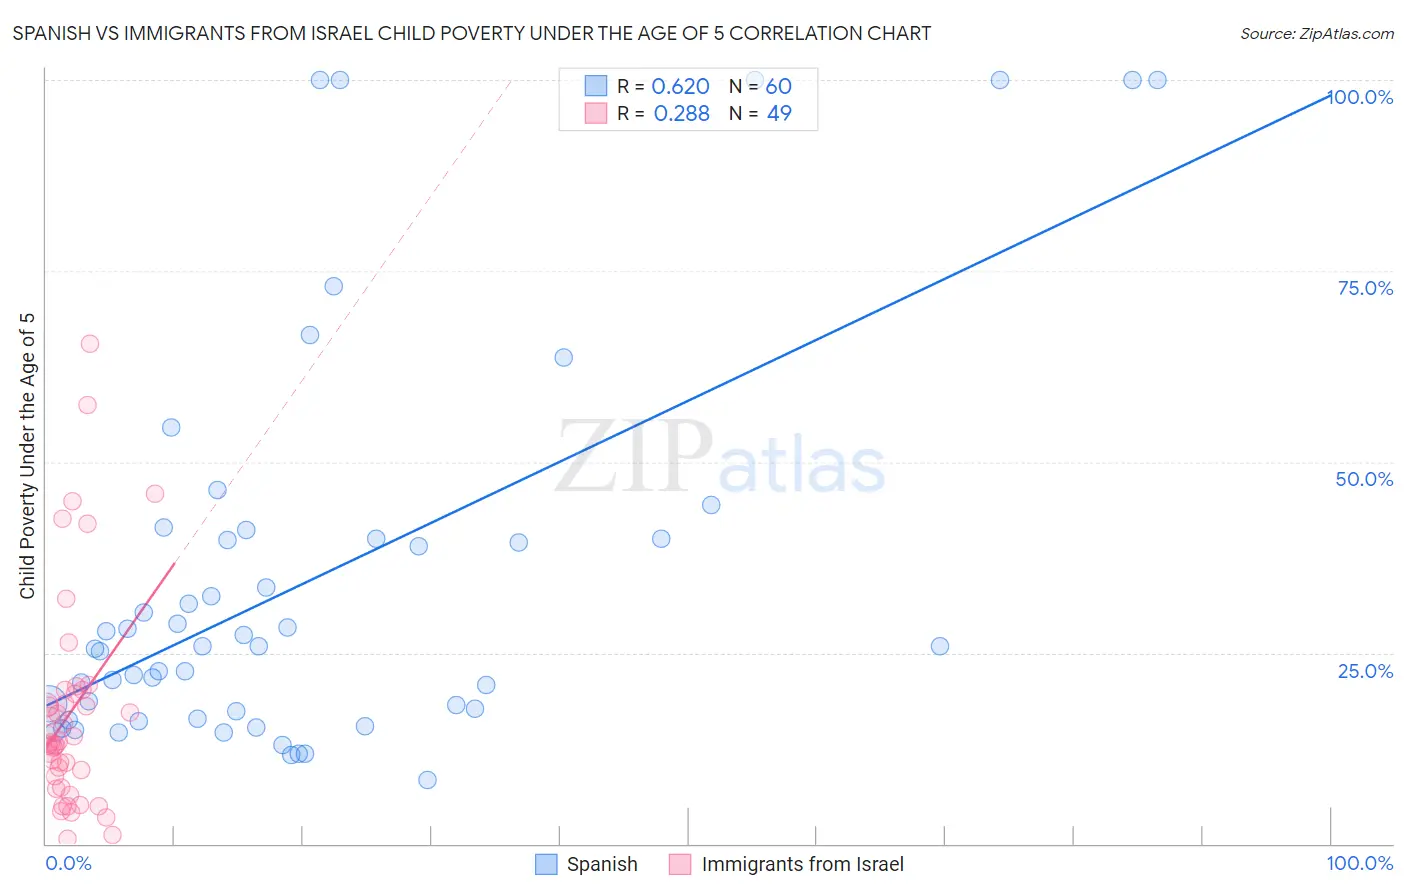 Spanish vs Immigrants from Israel Child Poverty Under the Age of 5